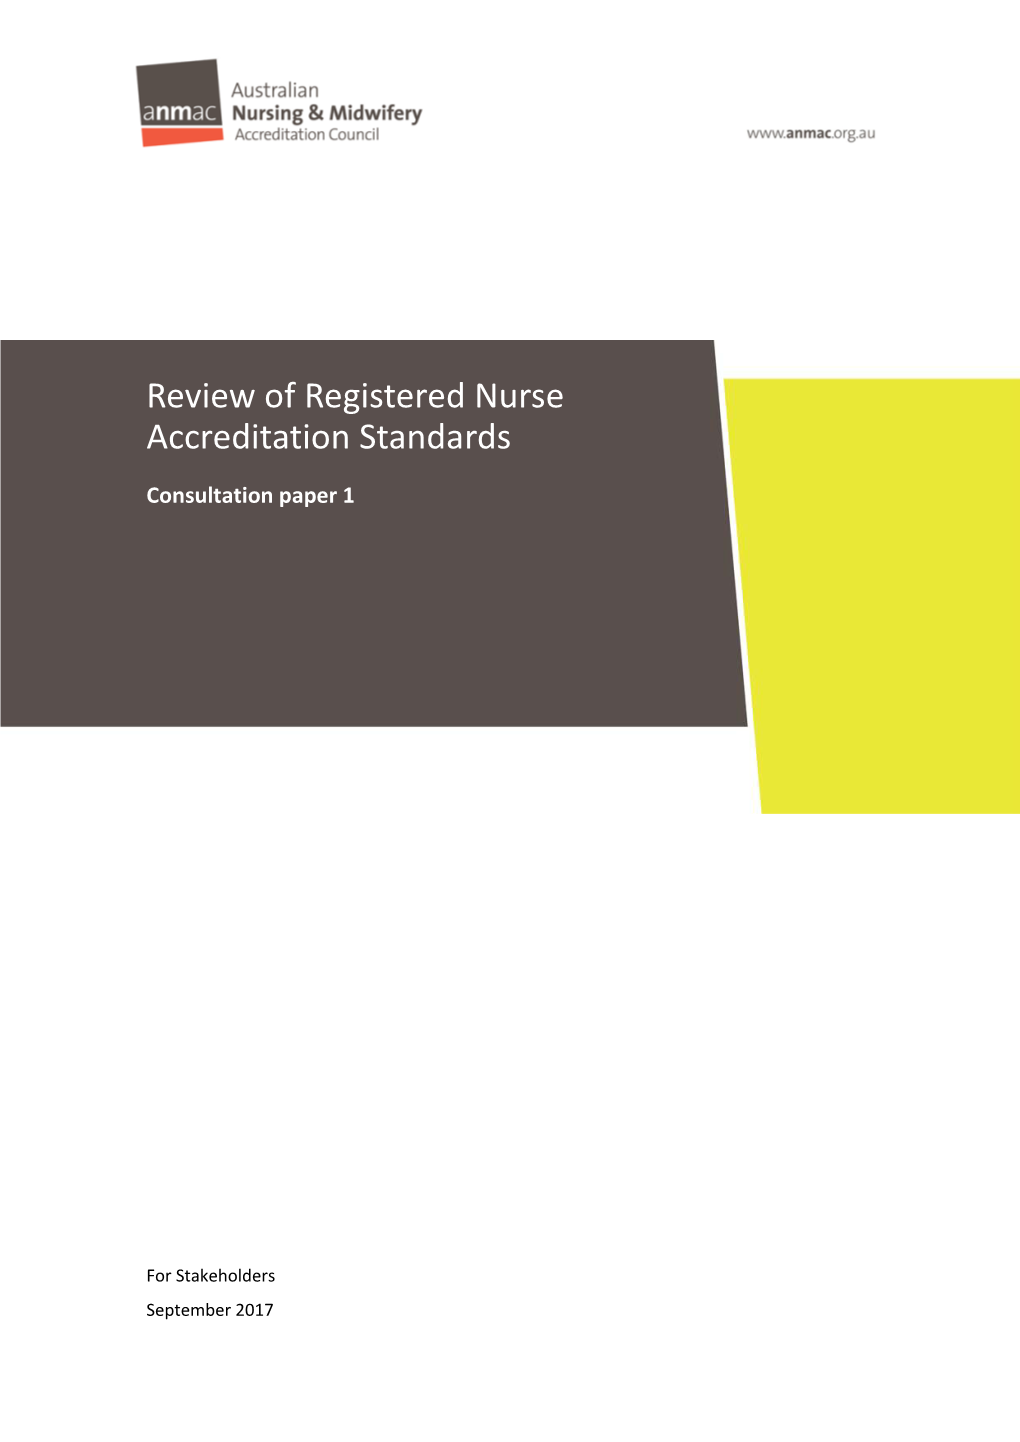 Review of Registered Nurse Accreditation Standards